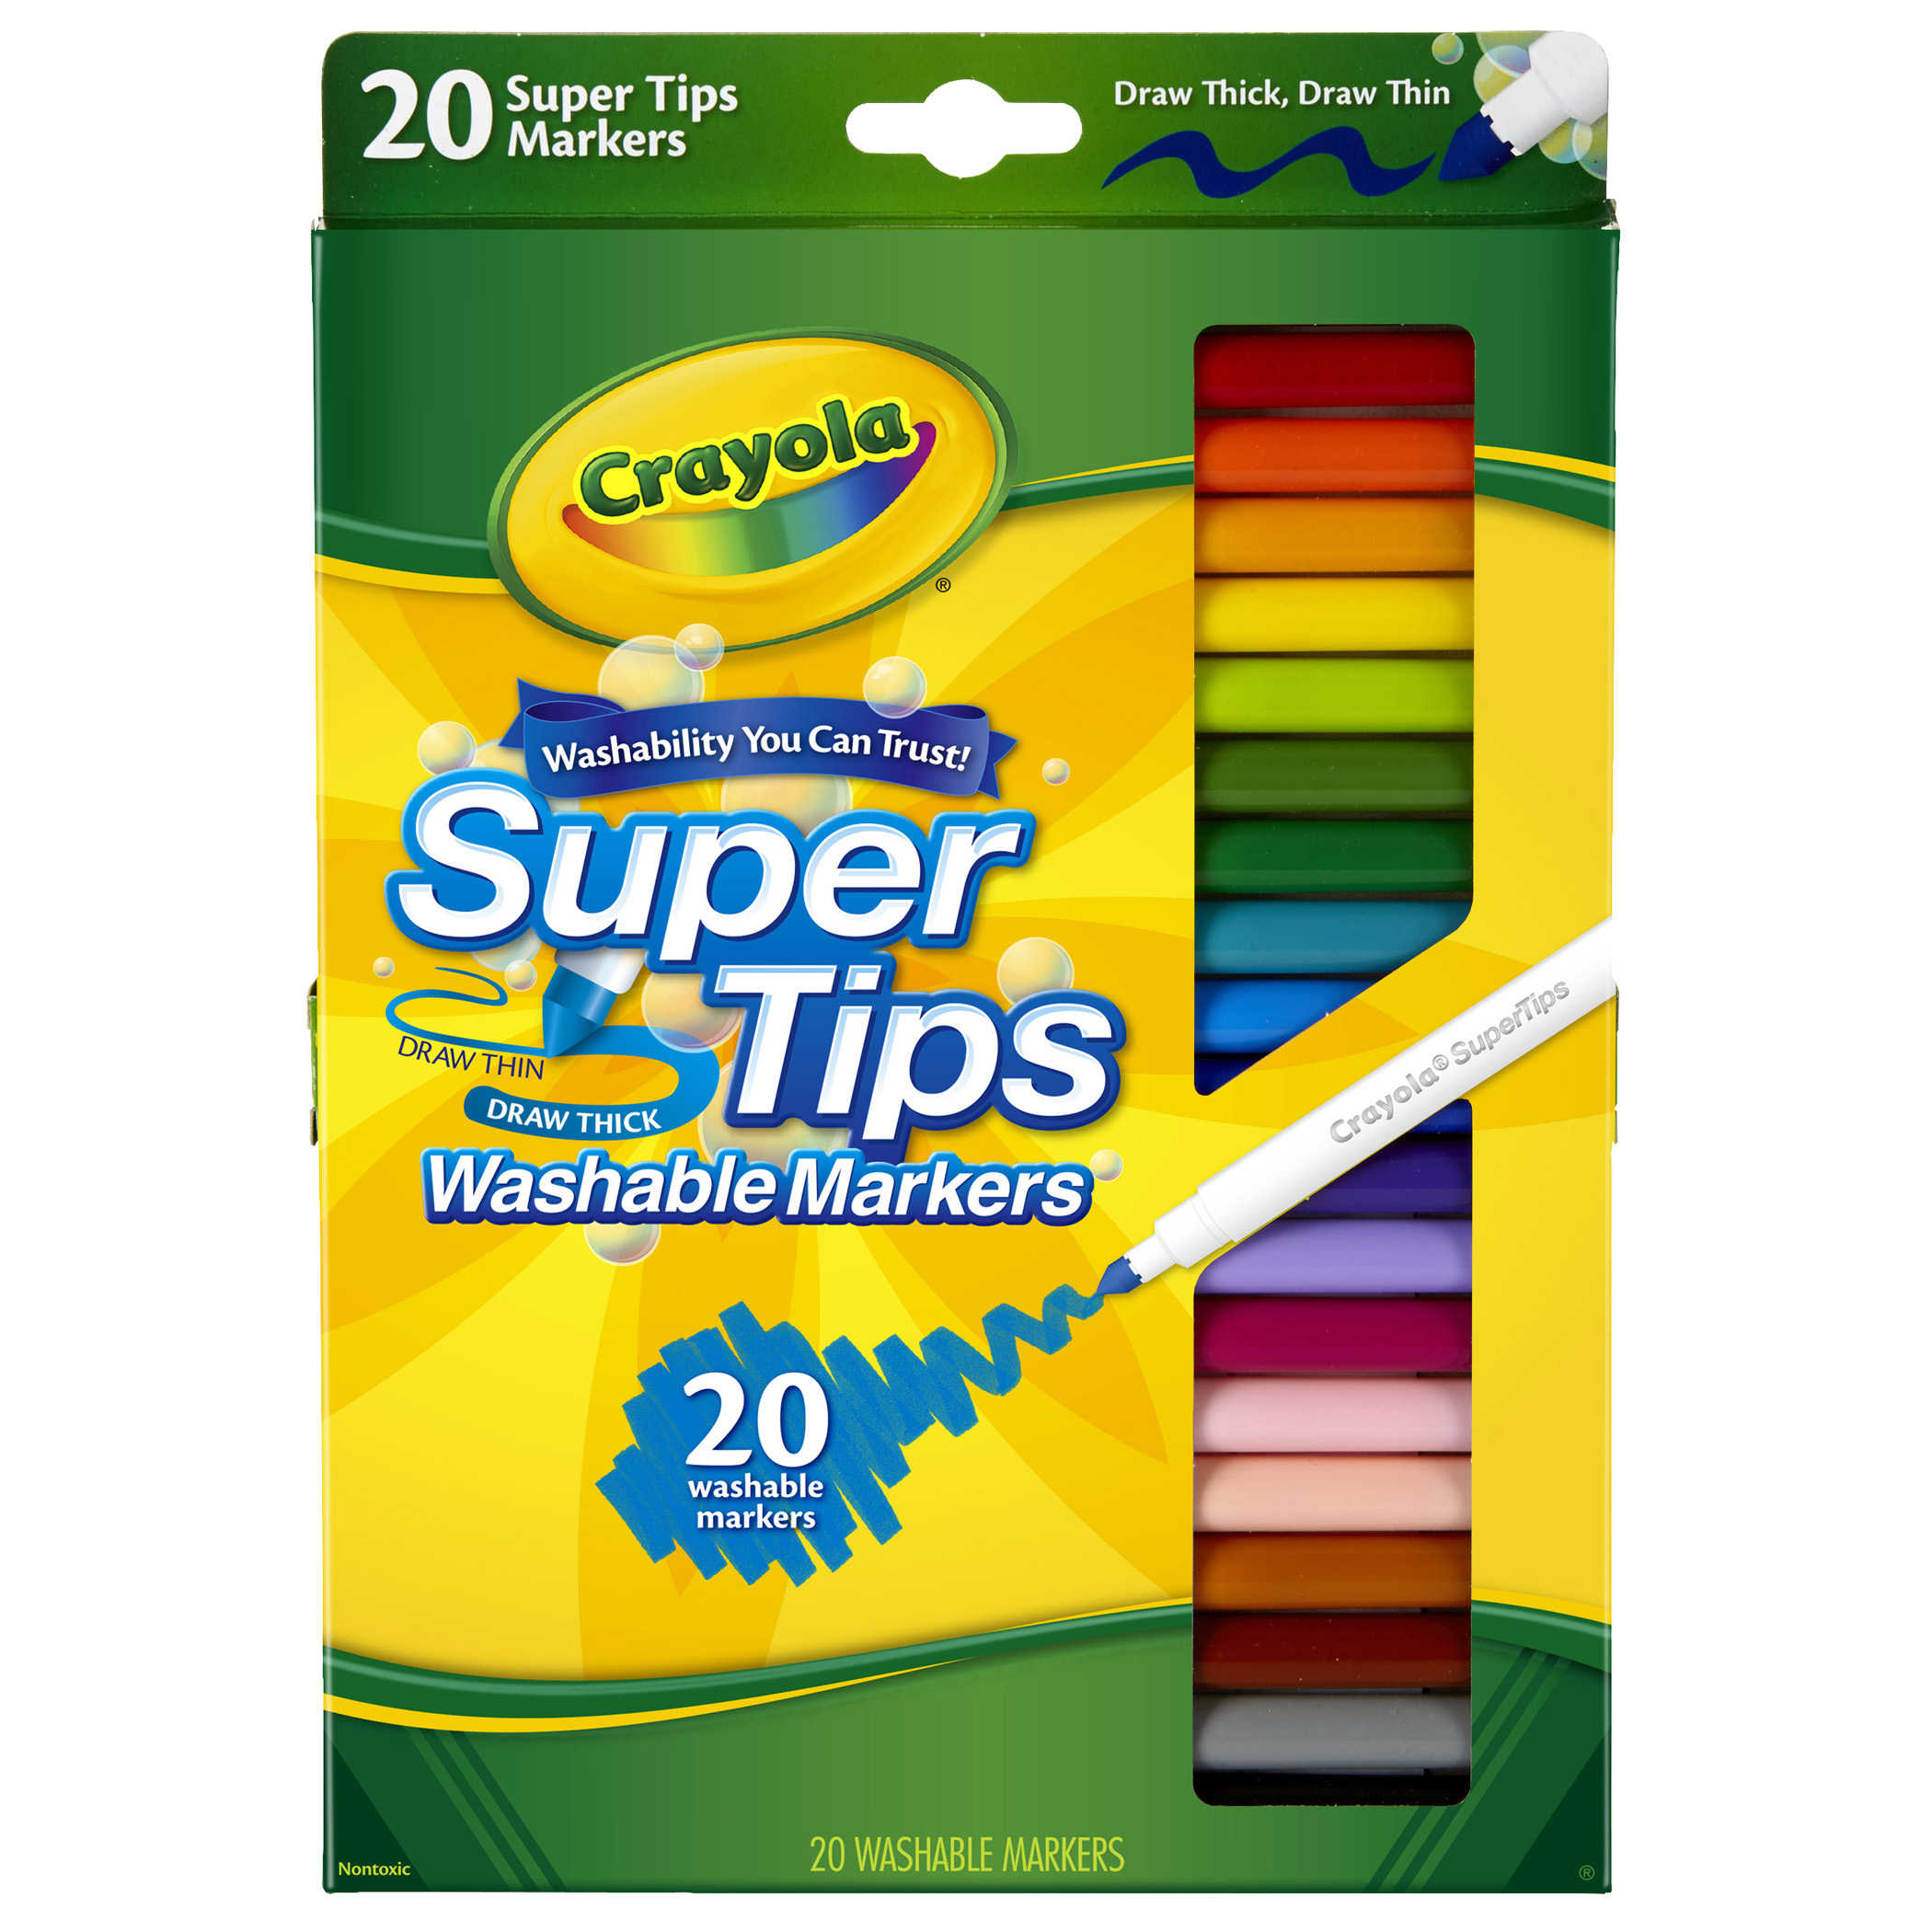 Double Doodlers Dual-Ended Washable Markers, Crayola.com